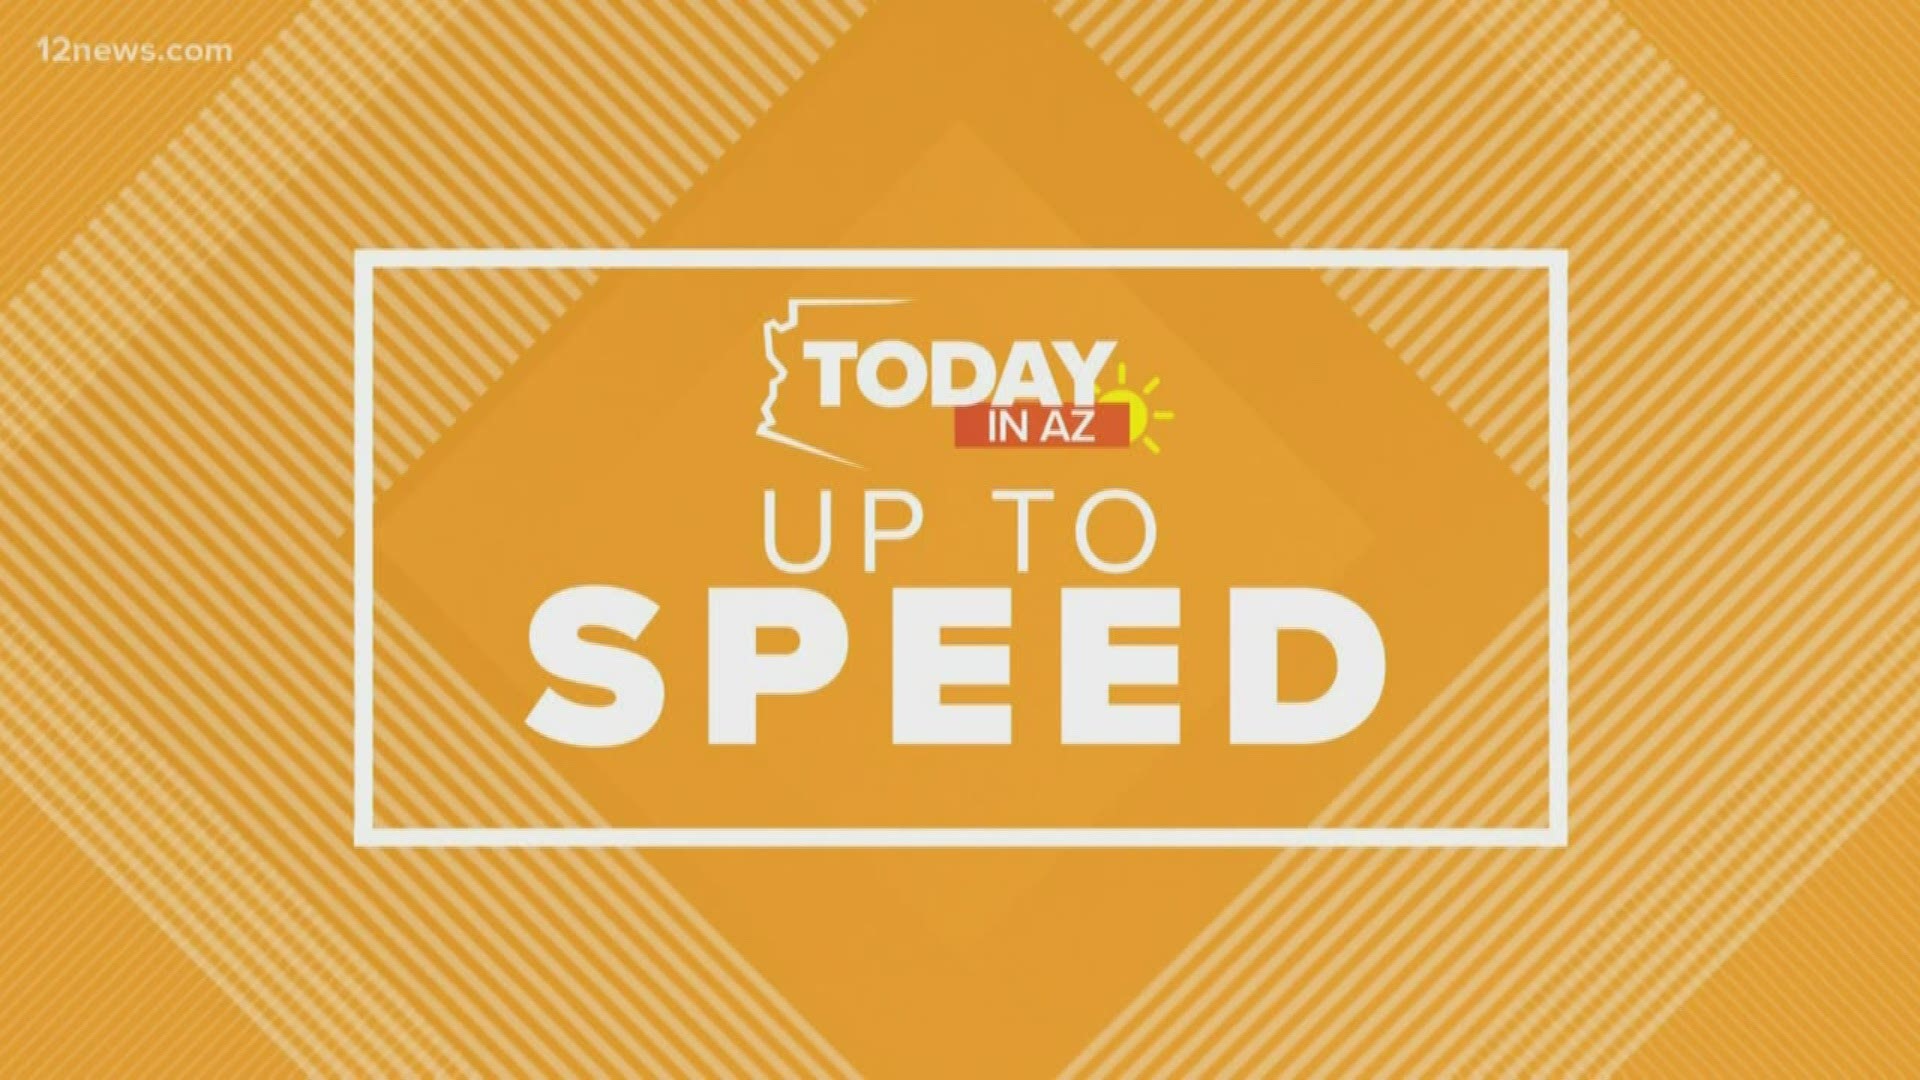 Get "Up to Speed" on the latest news happening around the Valley on Thursday morning.